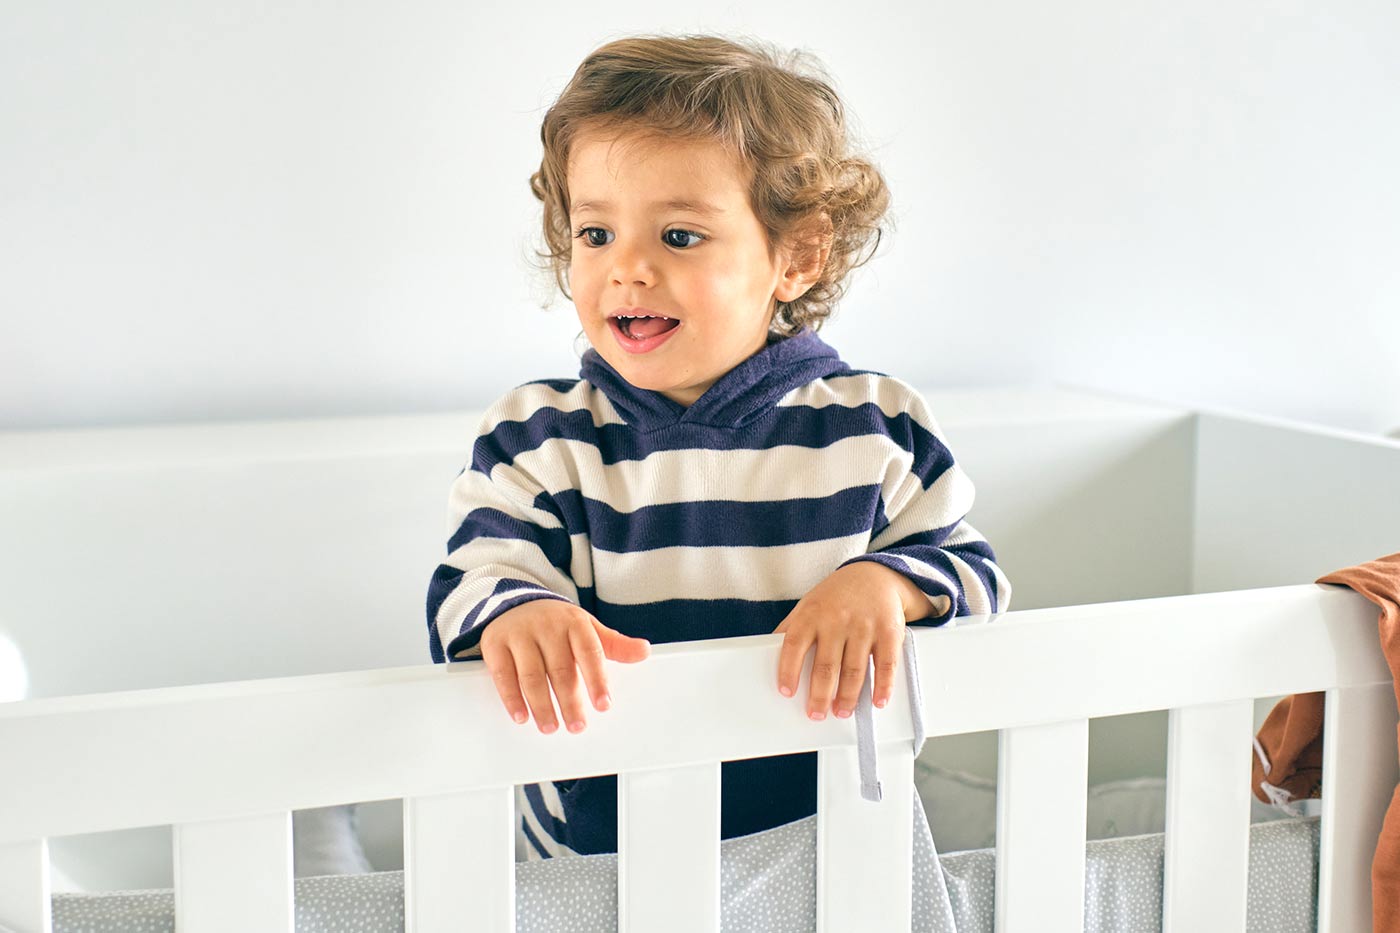 Signs Your Child Is Ready for a Toddler Bed